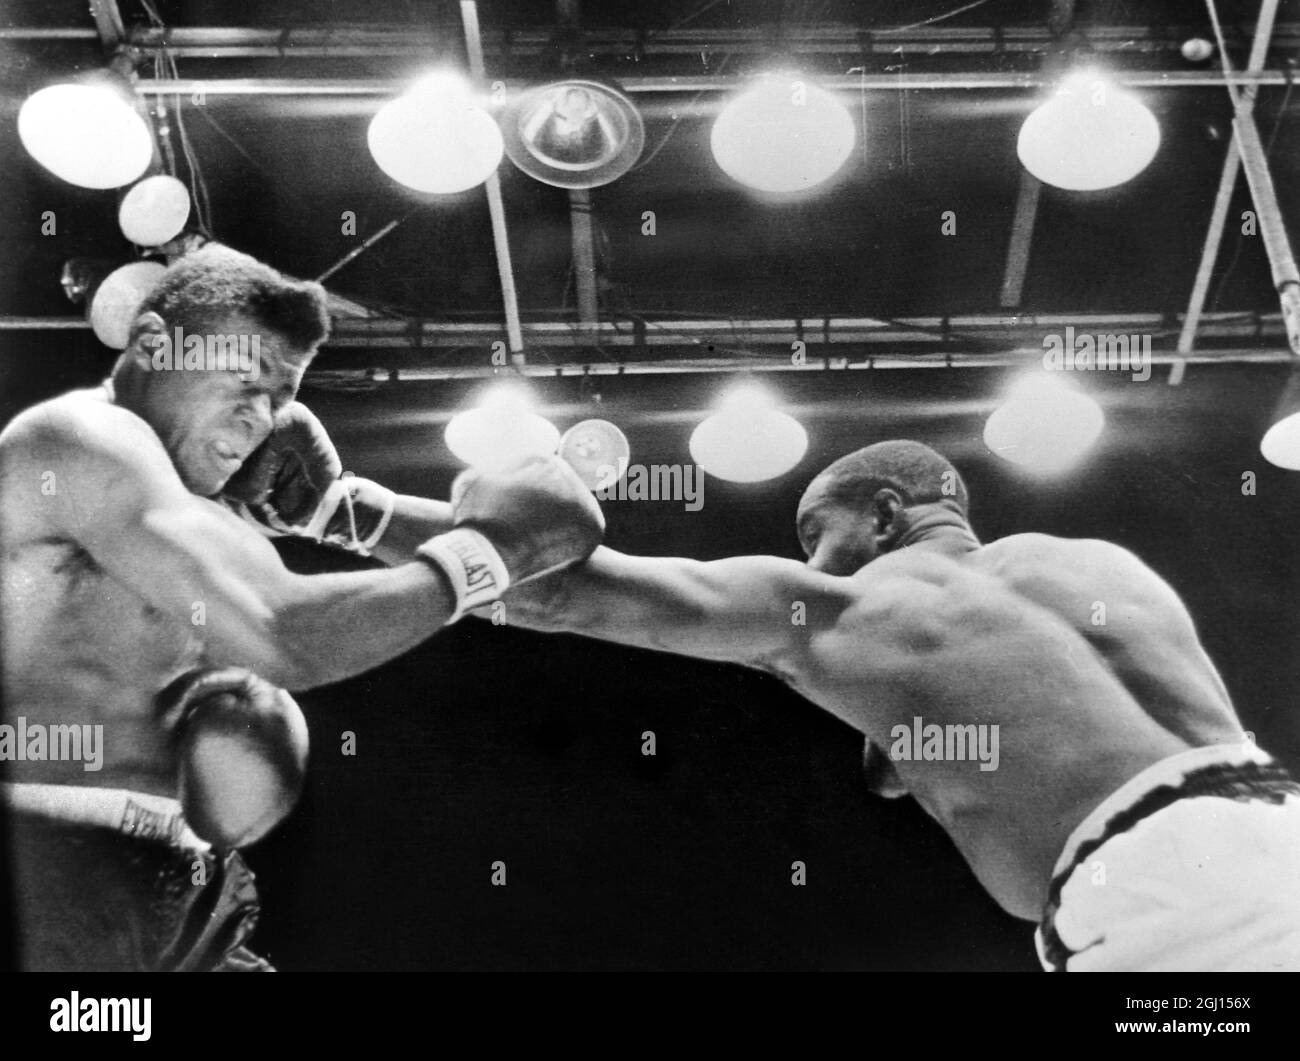 26 SEPTEMBER 1962 SONNY LISTON KNOCKS OUT WORLD HEAVYWEIGHT TITLE HOLDER FLOYD PATTERSON IN 2 MINUTES AND 6 SECONDS TO BECOME THE NEW CHAMPION. COMISKEY PARK, CHICAGO, ILLINOIS, USA. Stock Photo